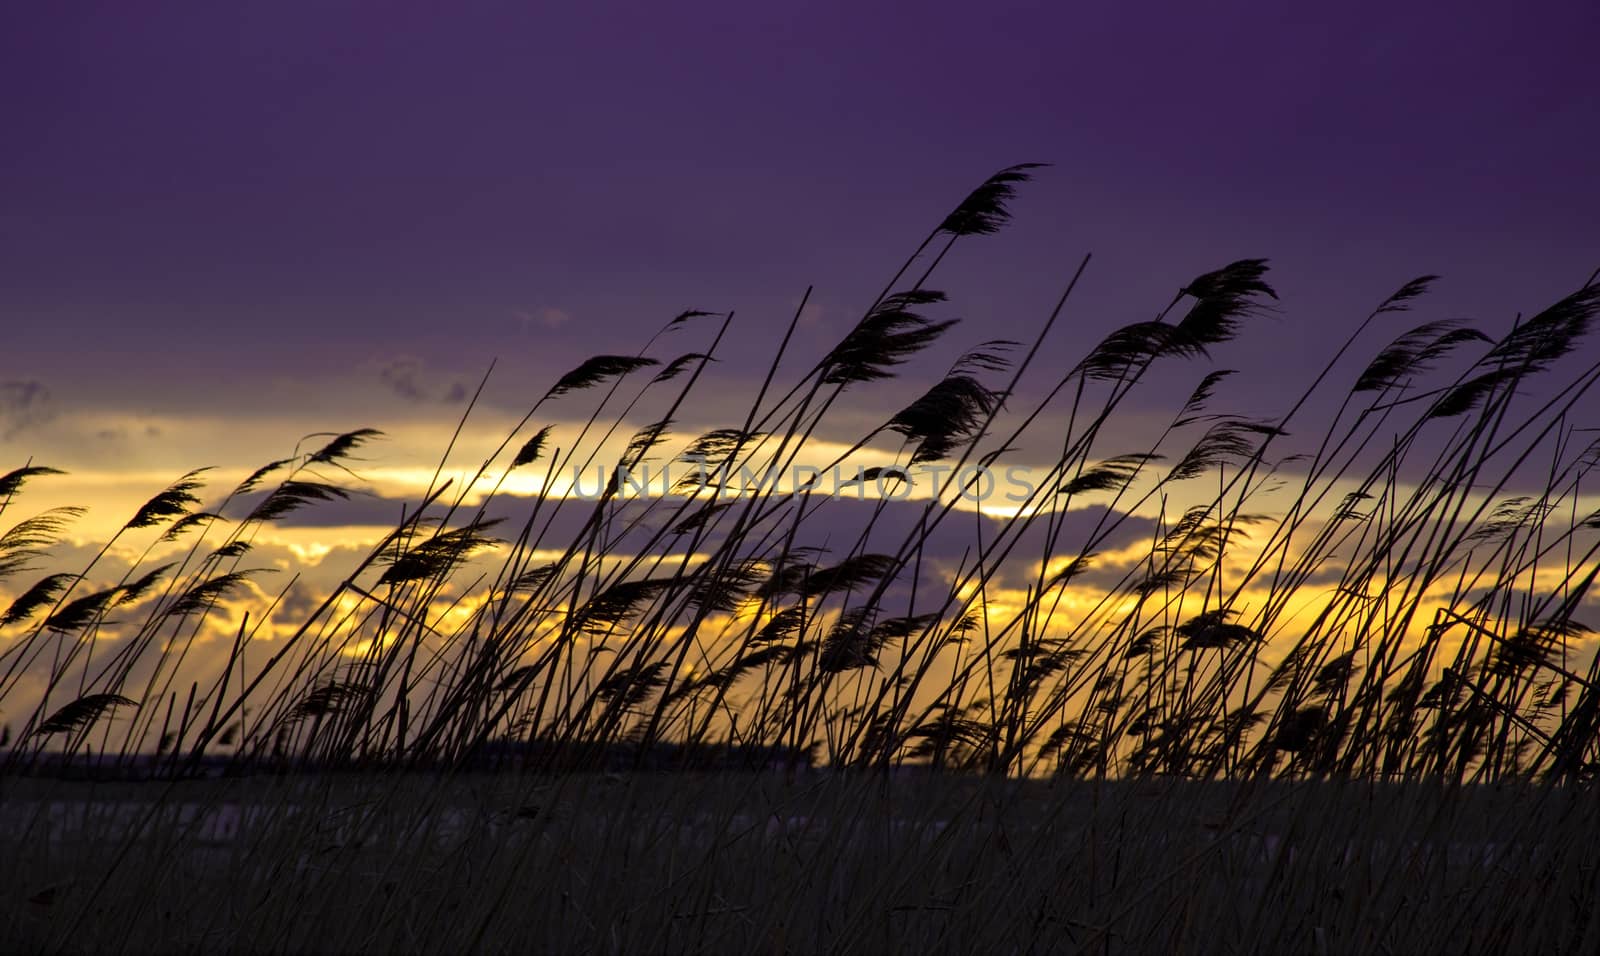 Grass at background sky and sun at sunset. Silhouette of spikelet grass against background of colorful sky and clouds in summer at sunset.